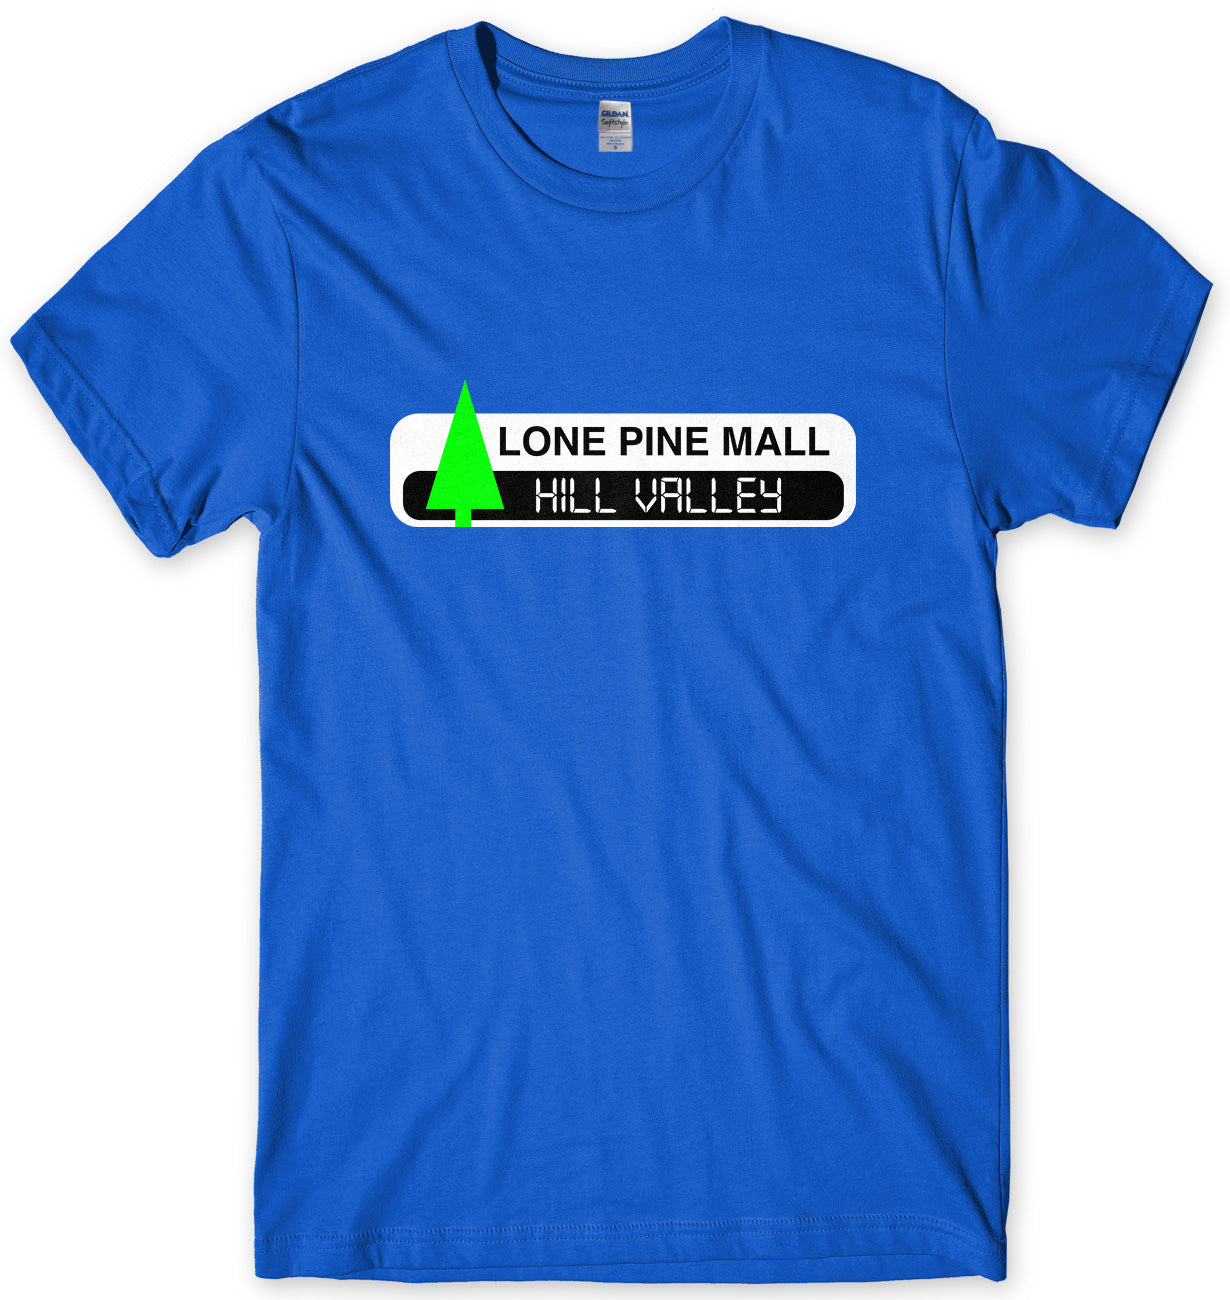 LONE PINE MALL HILL VALLEY - INSPIRED BY BACK TO THE FUTURE MENS UNISEX T-SHIRT